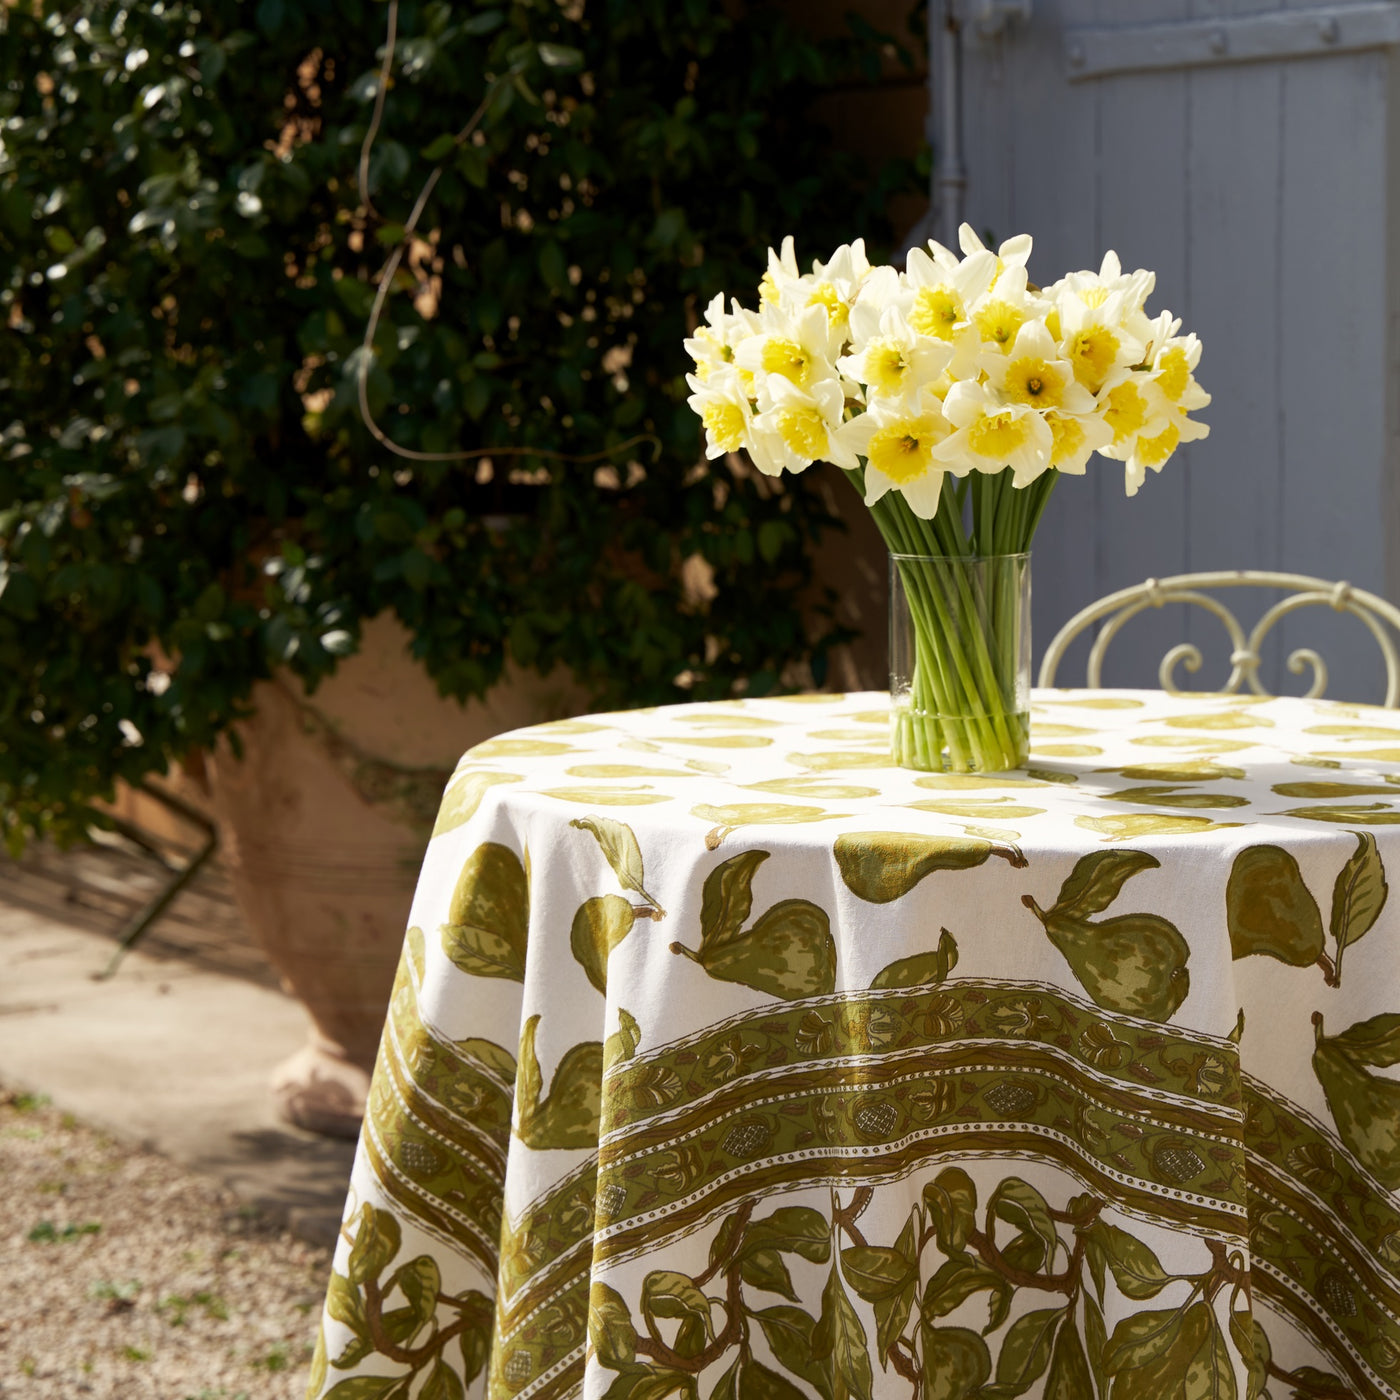 French Tablecloth Orchard Pear Green